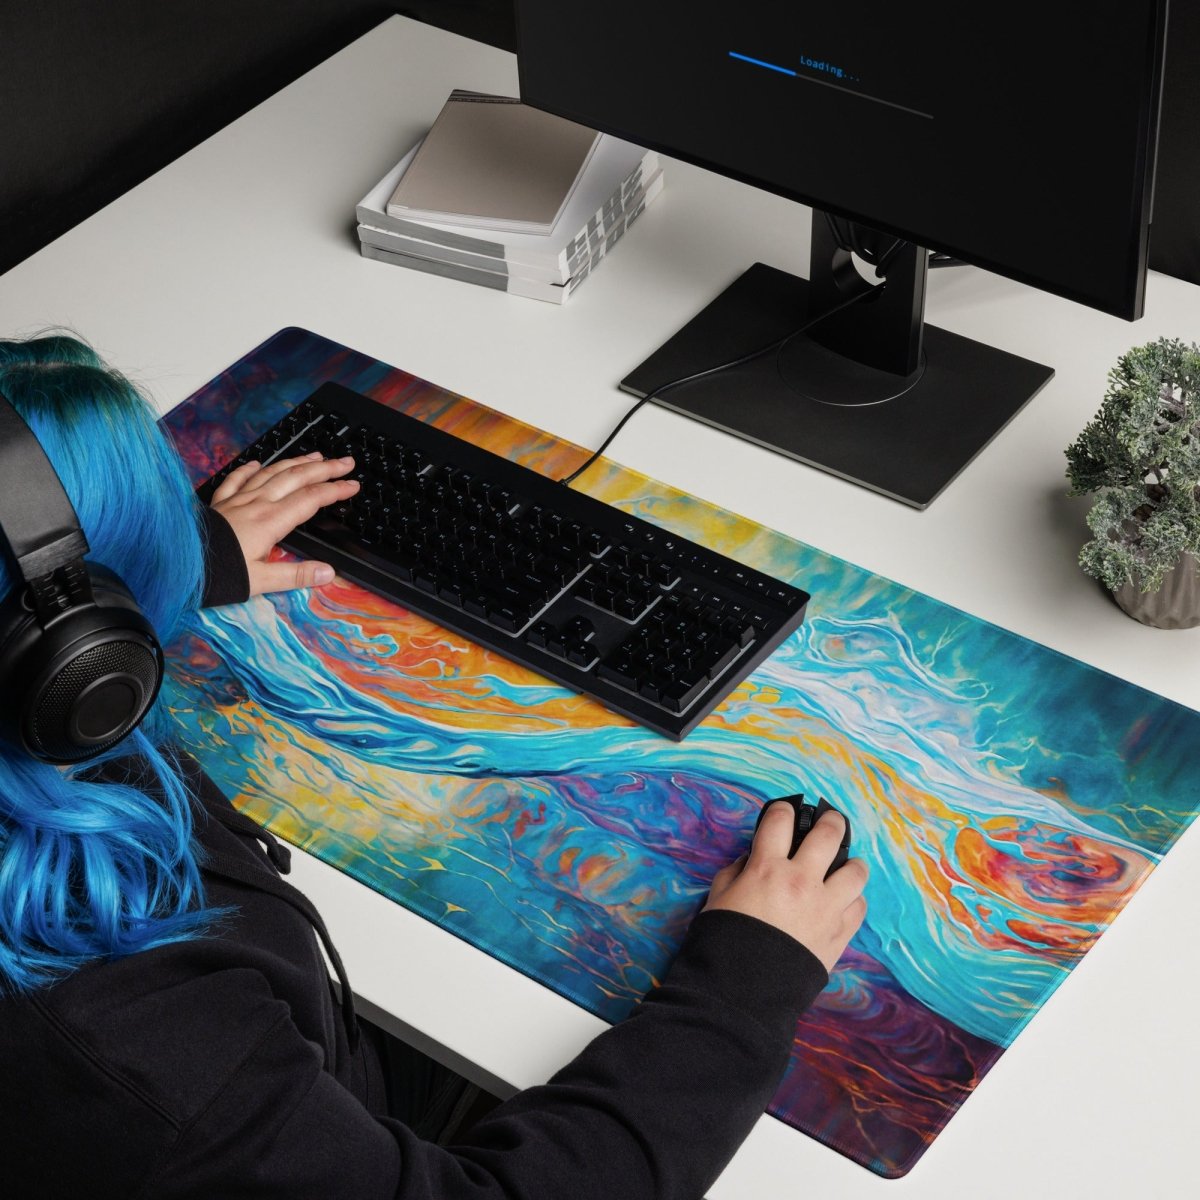 Abstract swirl - Gaming mouse pad - Ever colorful